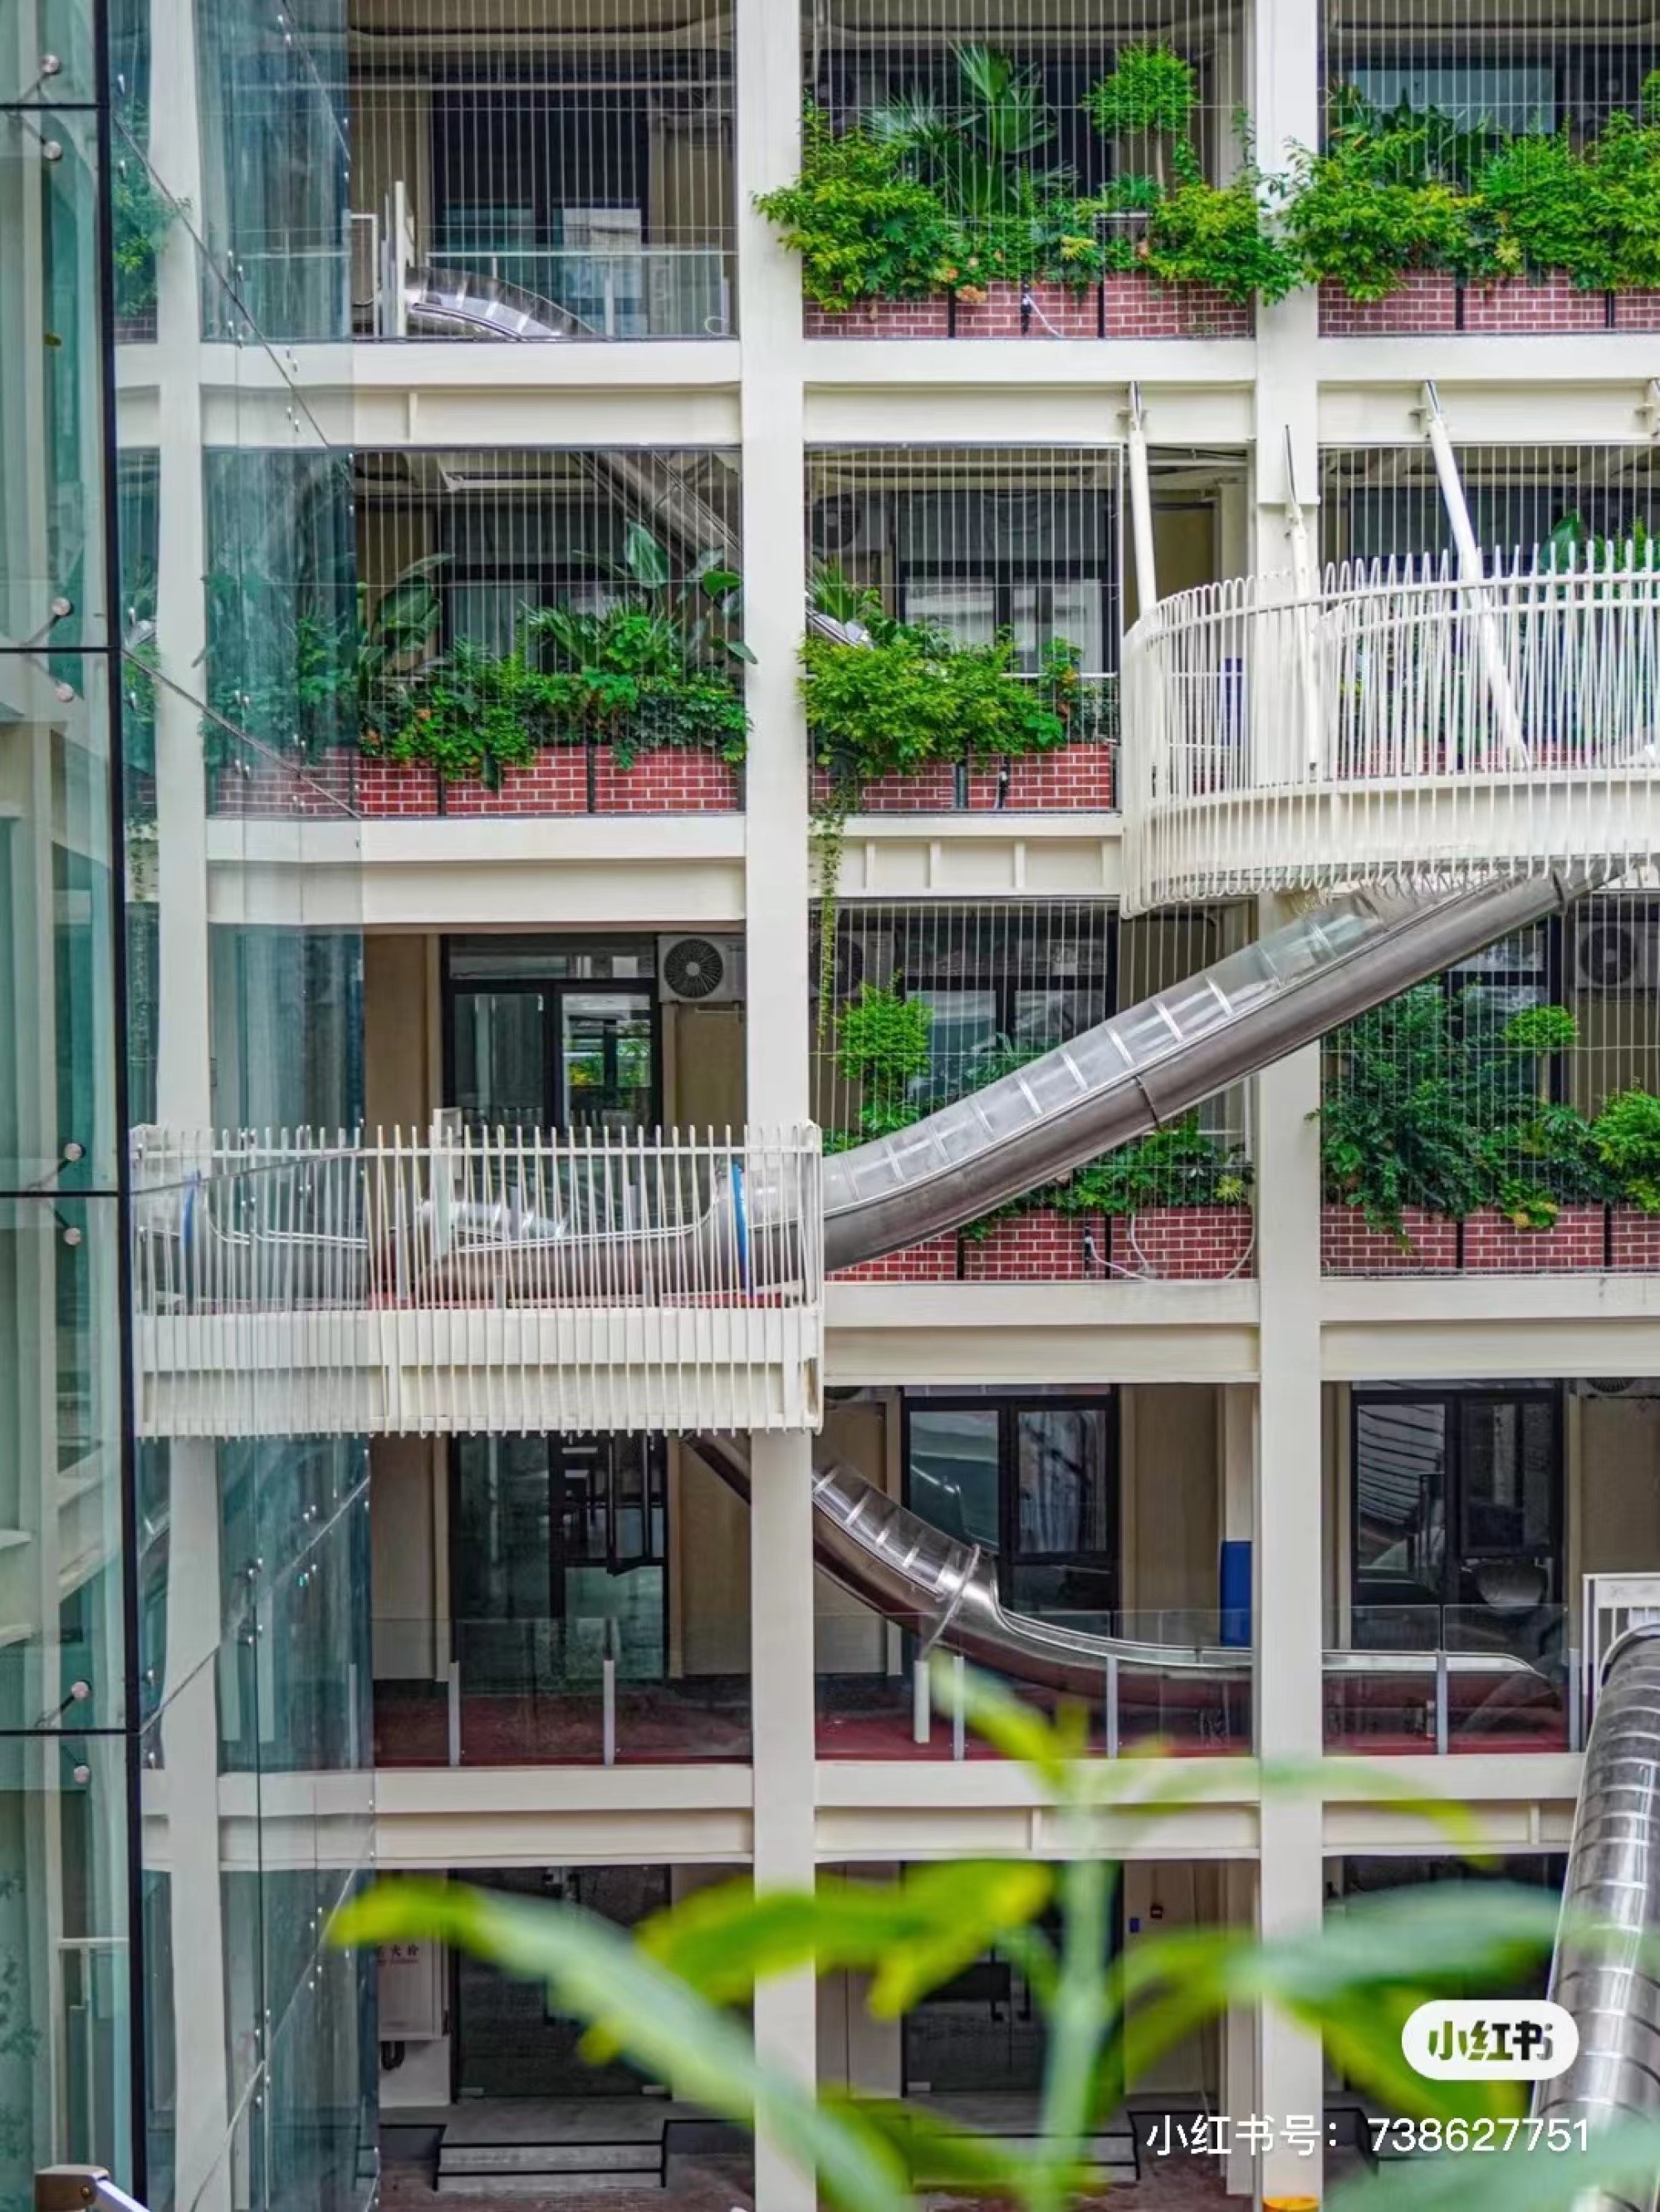 Besides the slides, the integration of plant life into the architecture has been popular. Photo: Xiaohongshu